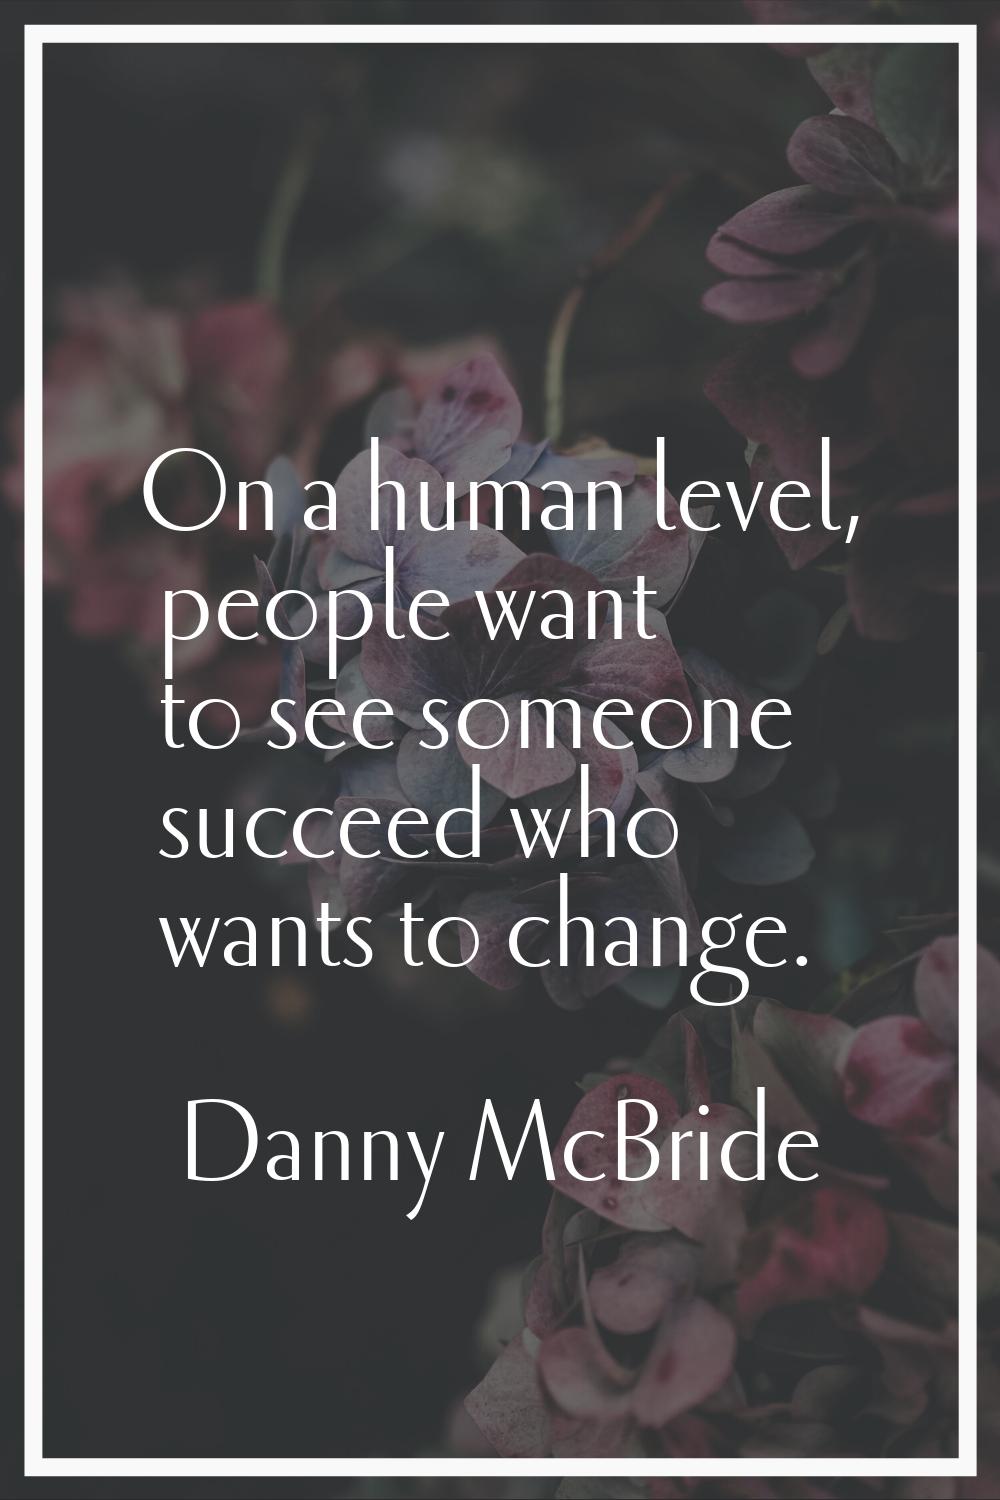 On a human level, people want to see someone succeed who wants to change.